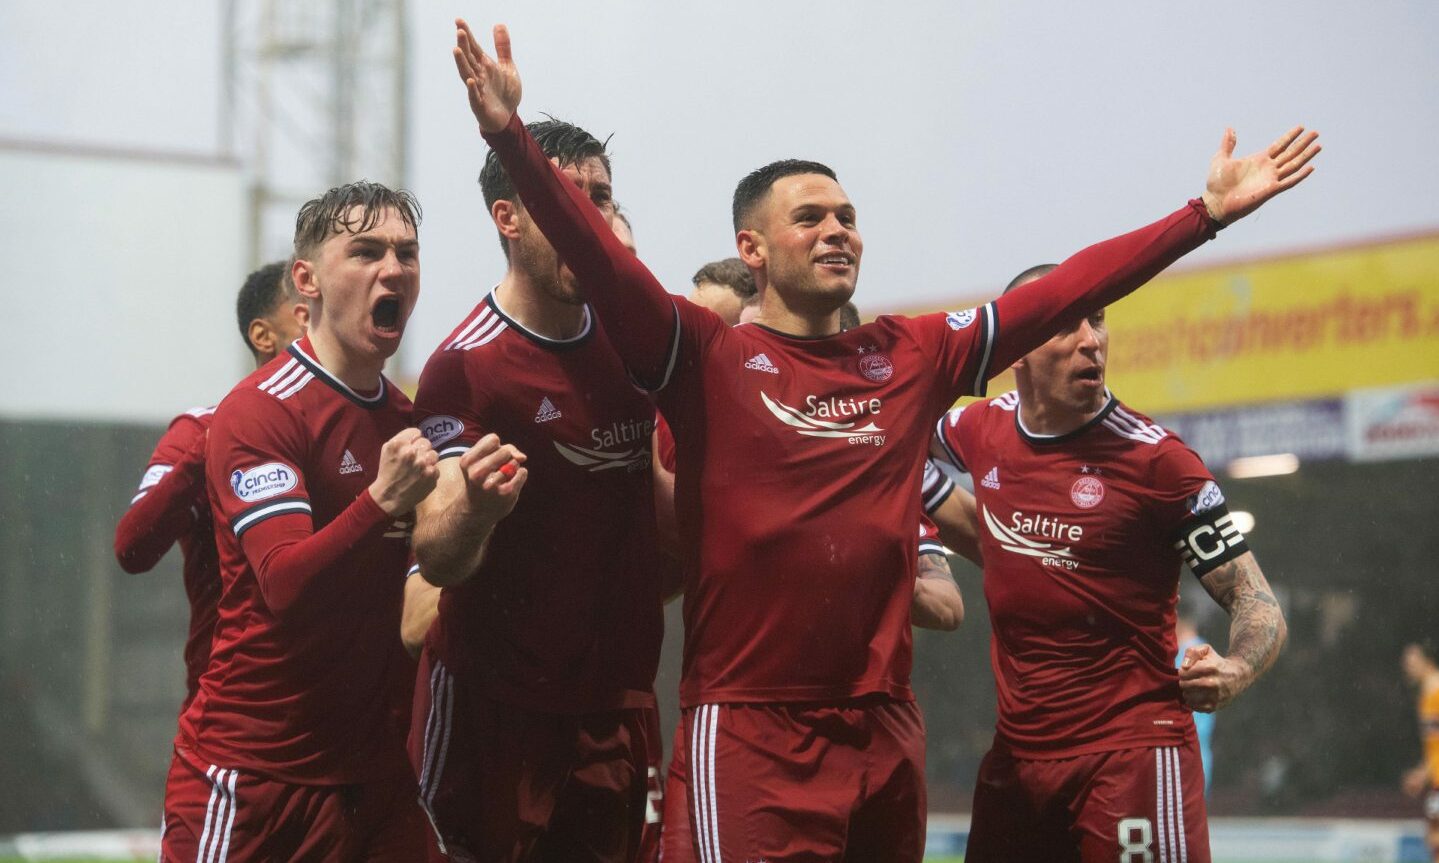 Aberdeen's Christian Ramirez celebrates making it 1-0 against Motherwell - his 15th goal of the season. He has not scored since.